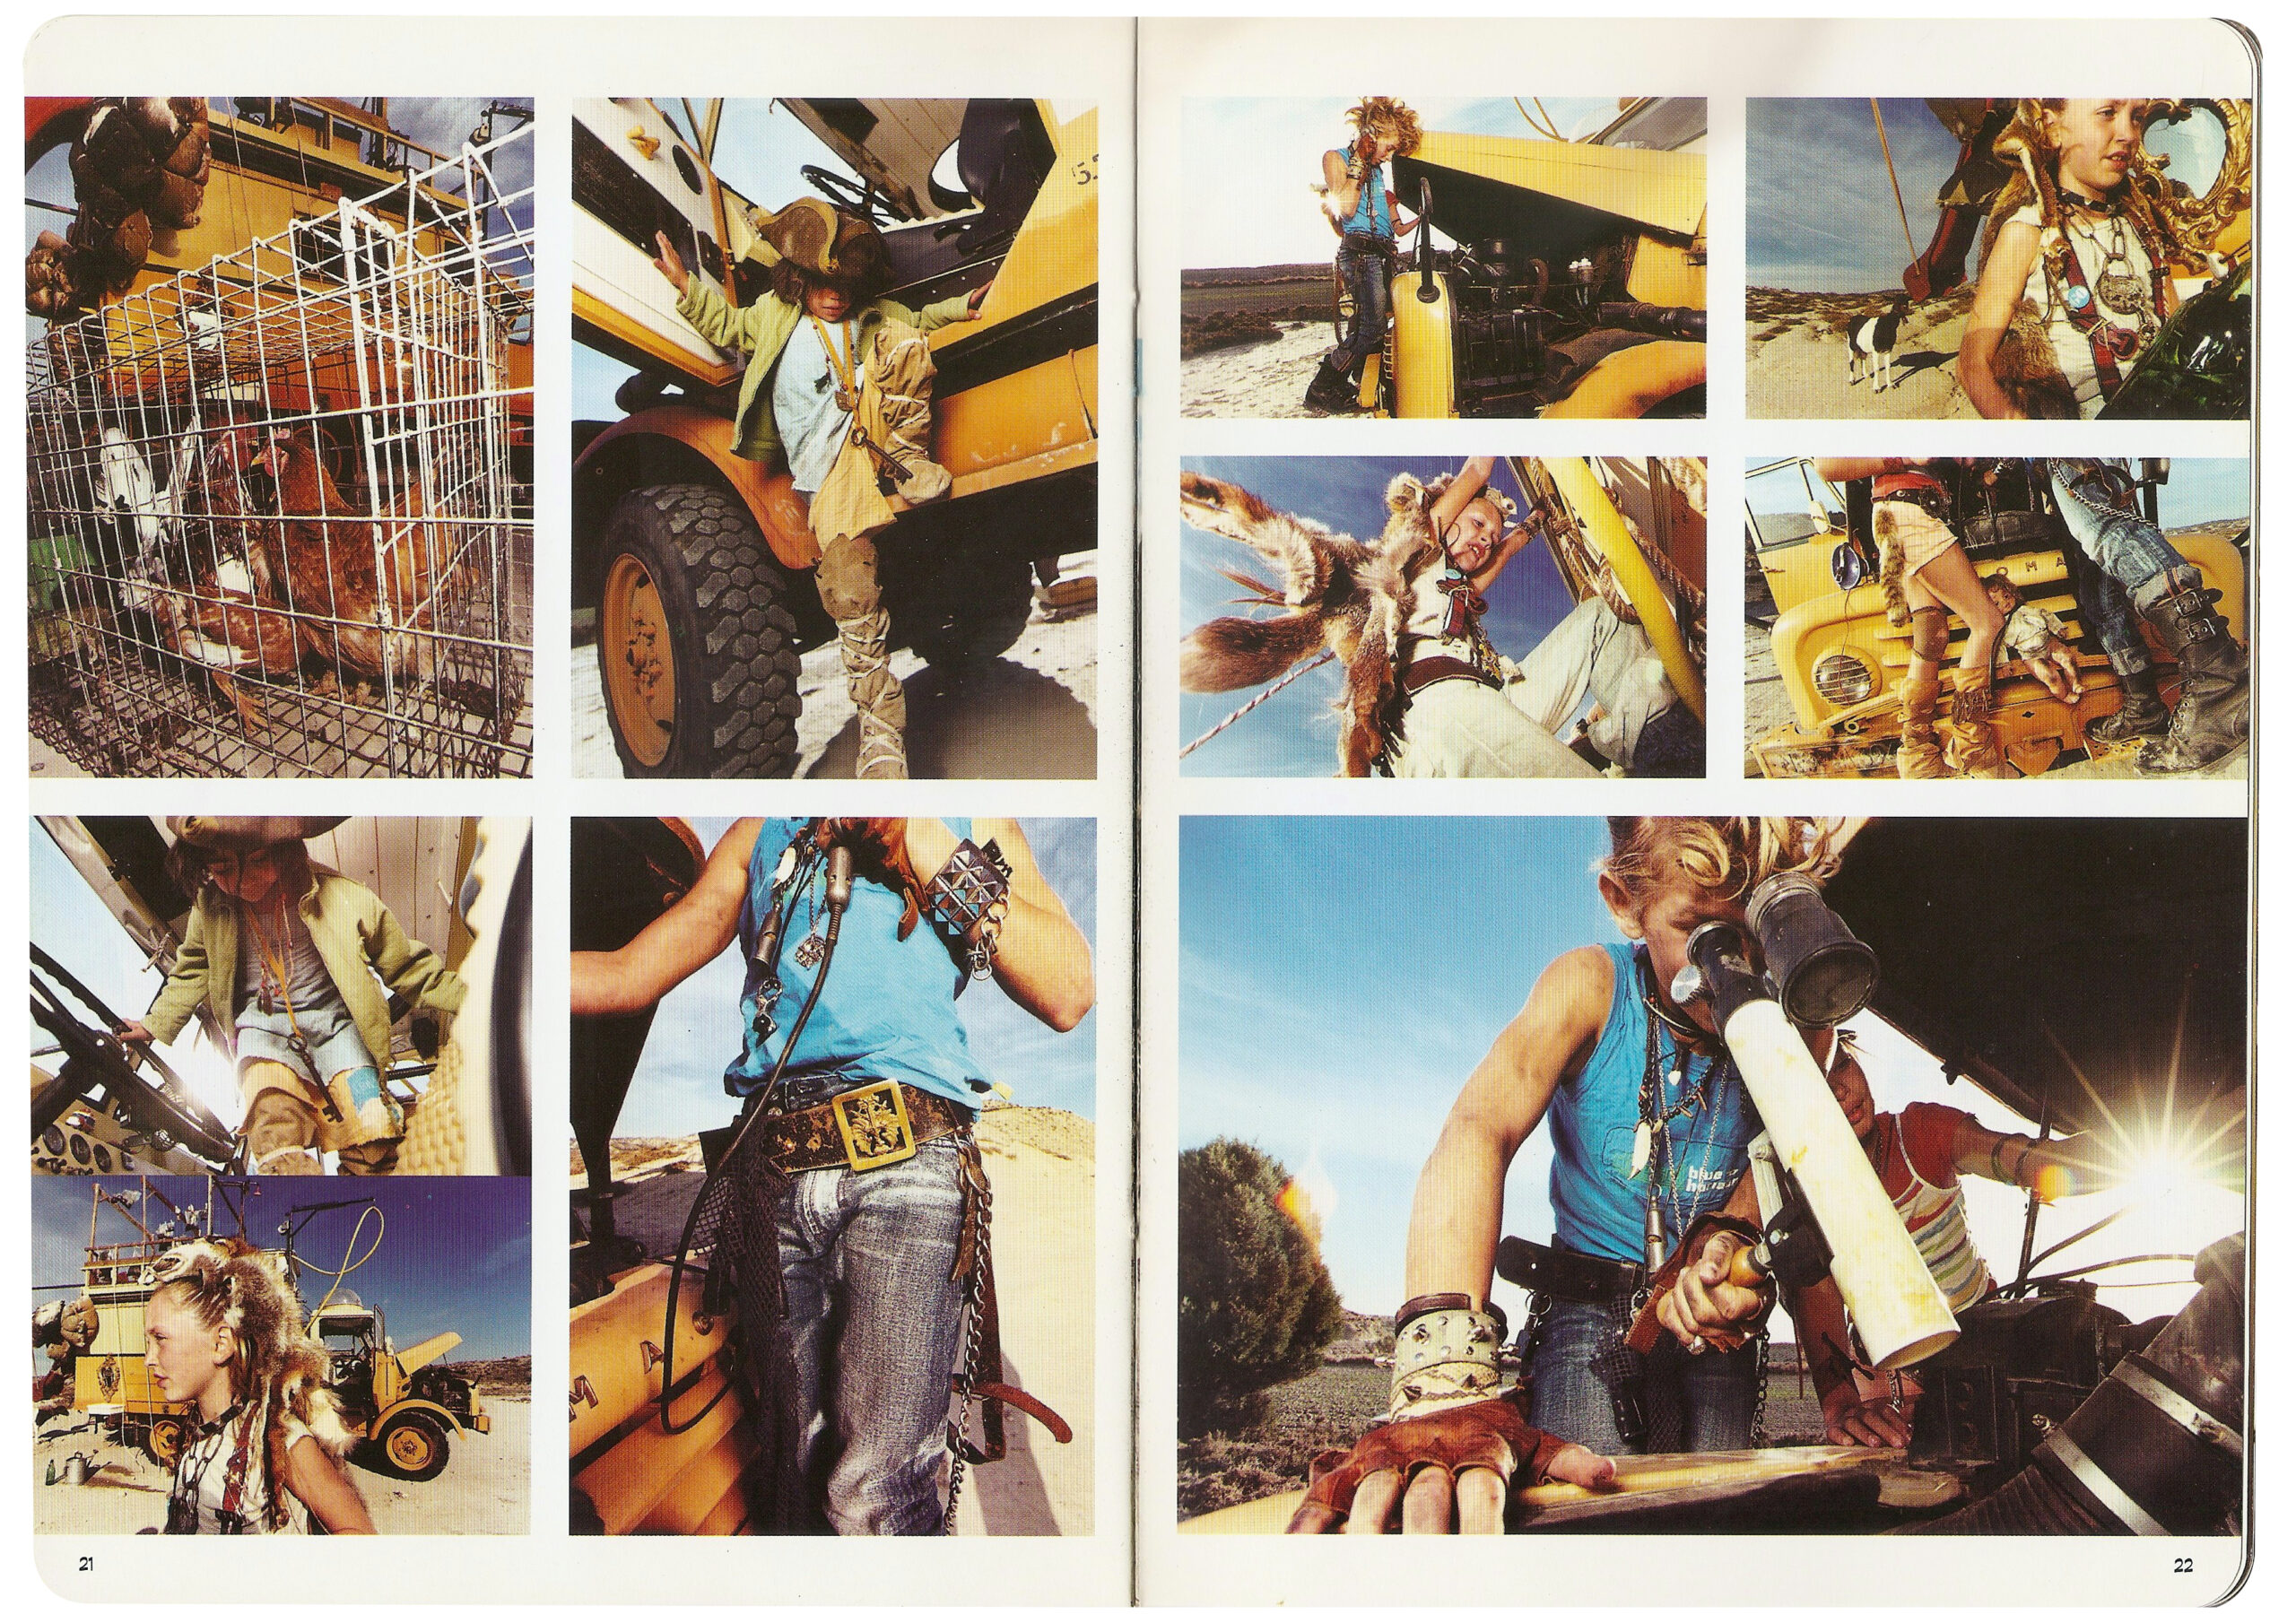 Photography campaign for Diesel Kids with photographer Txema Yeste. Art direction by Maria Puig